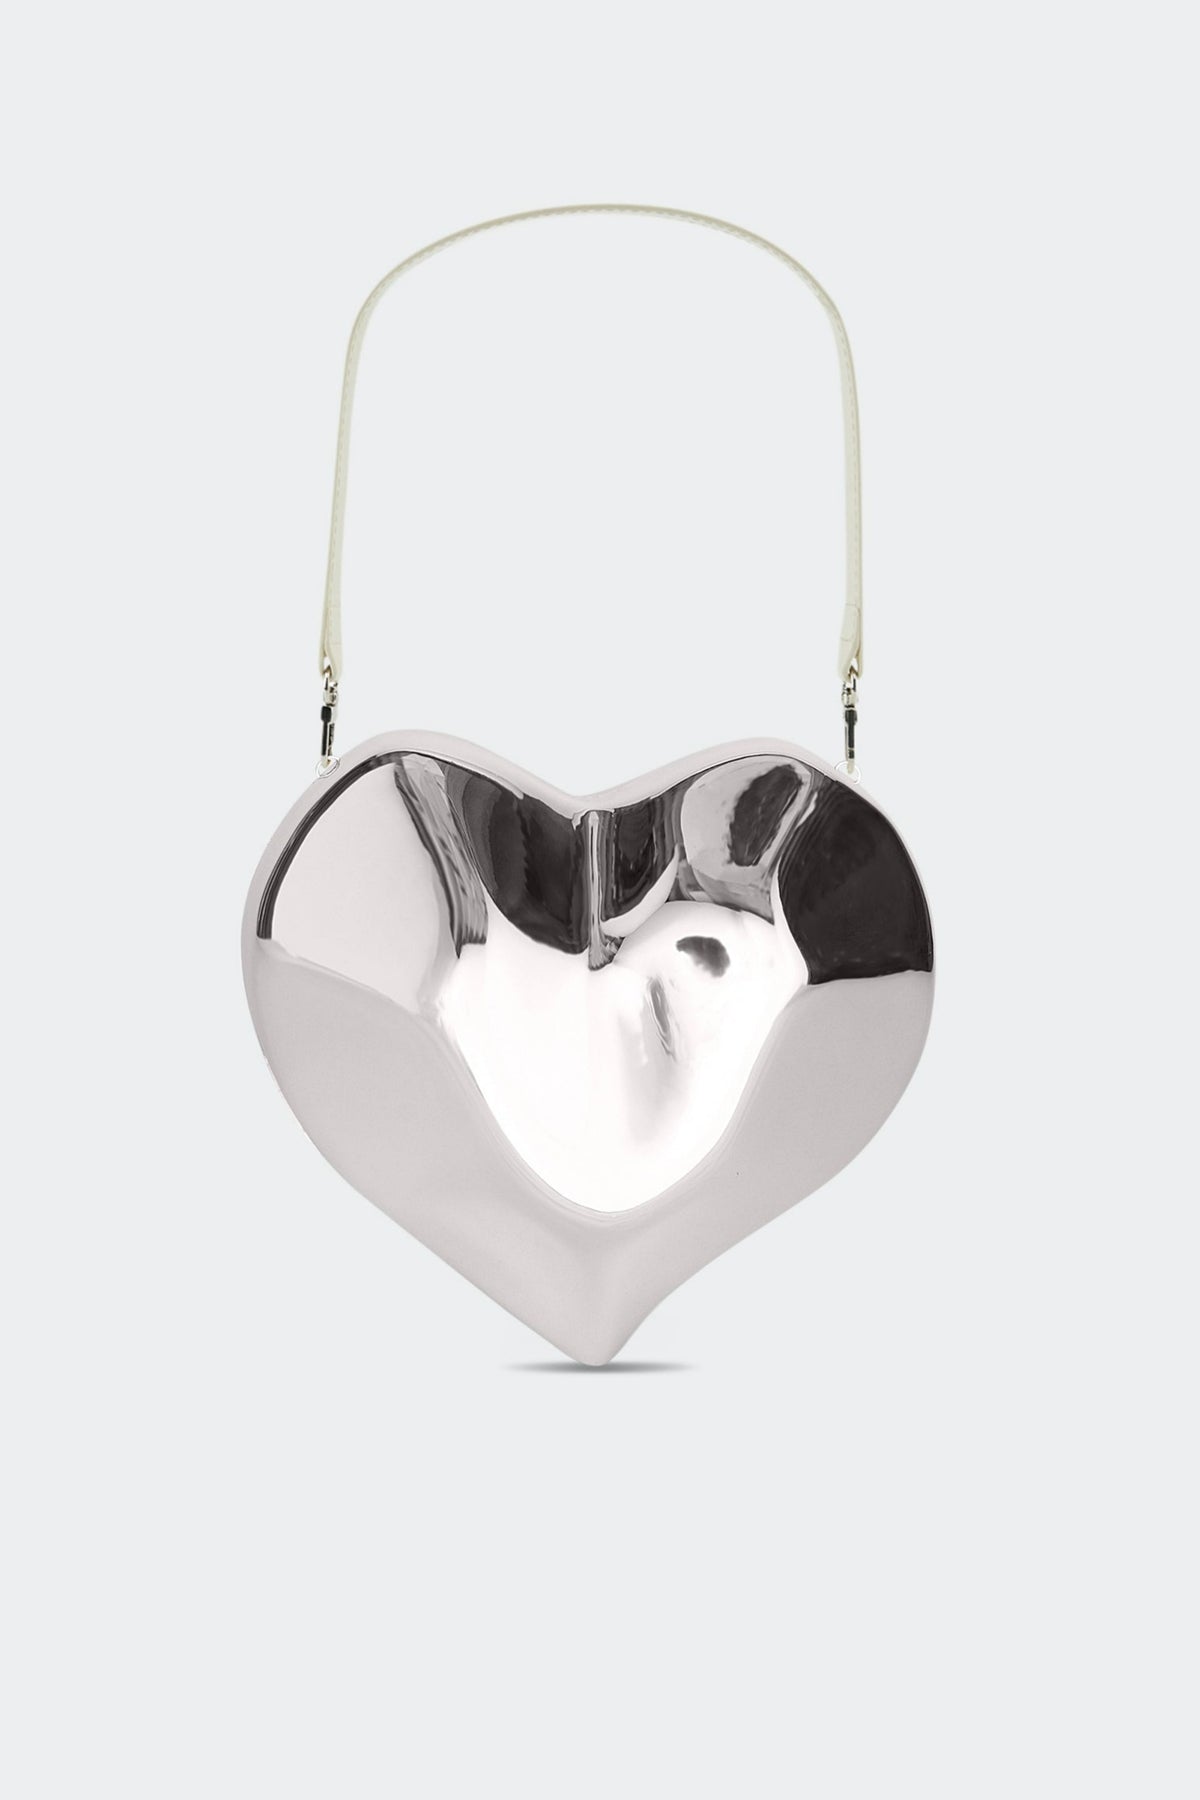 S1005-MOLDED-HEART-BAG-SILVER